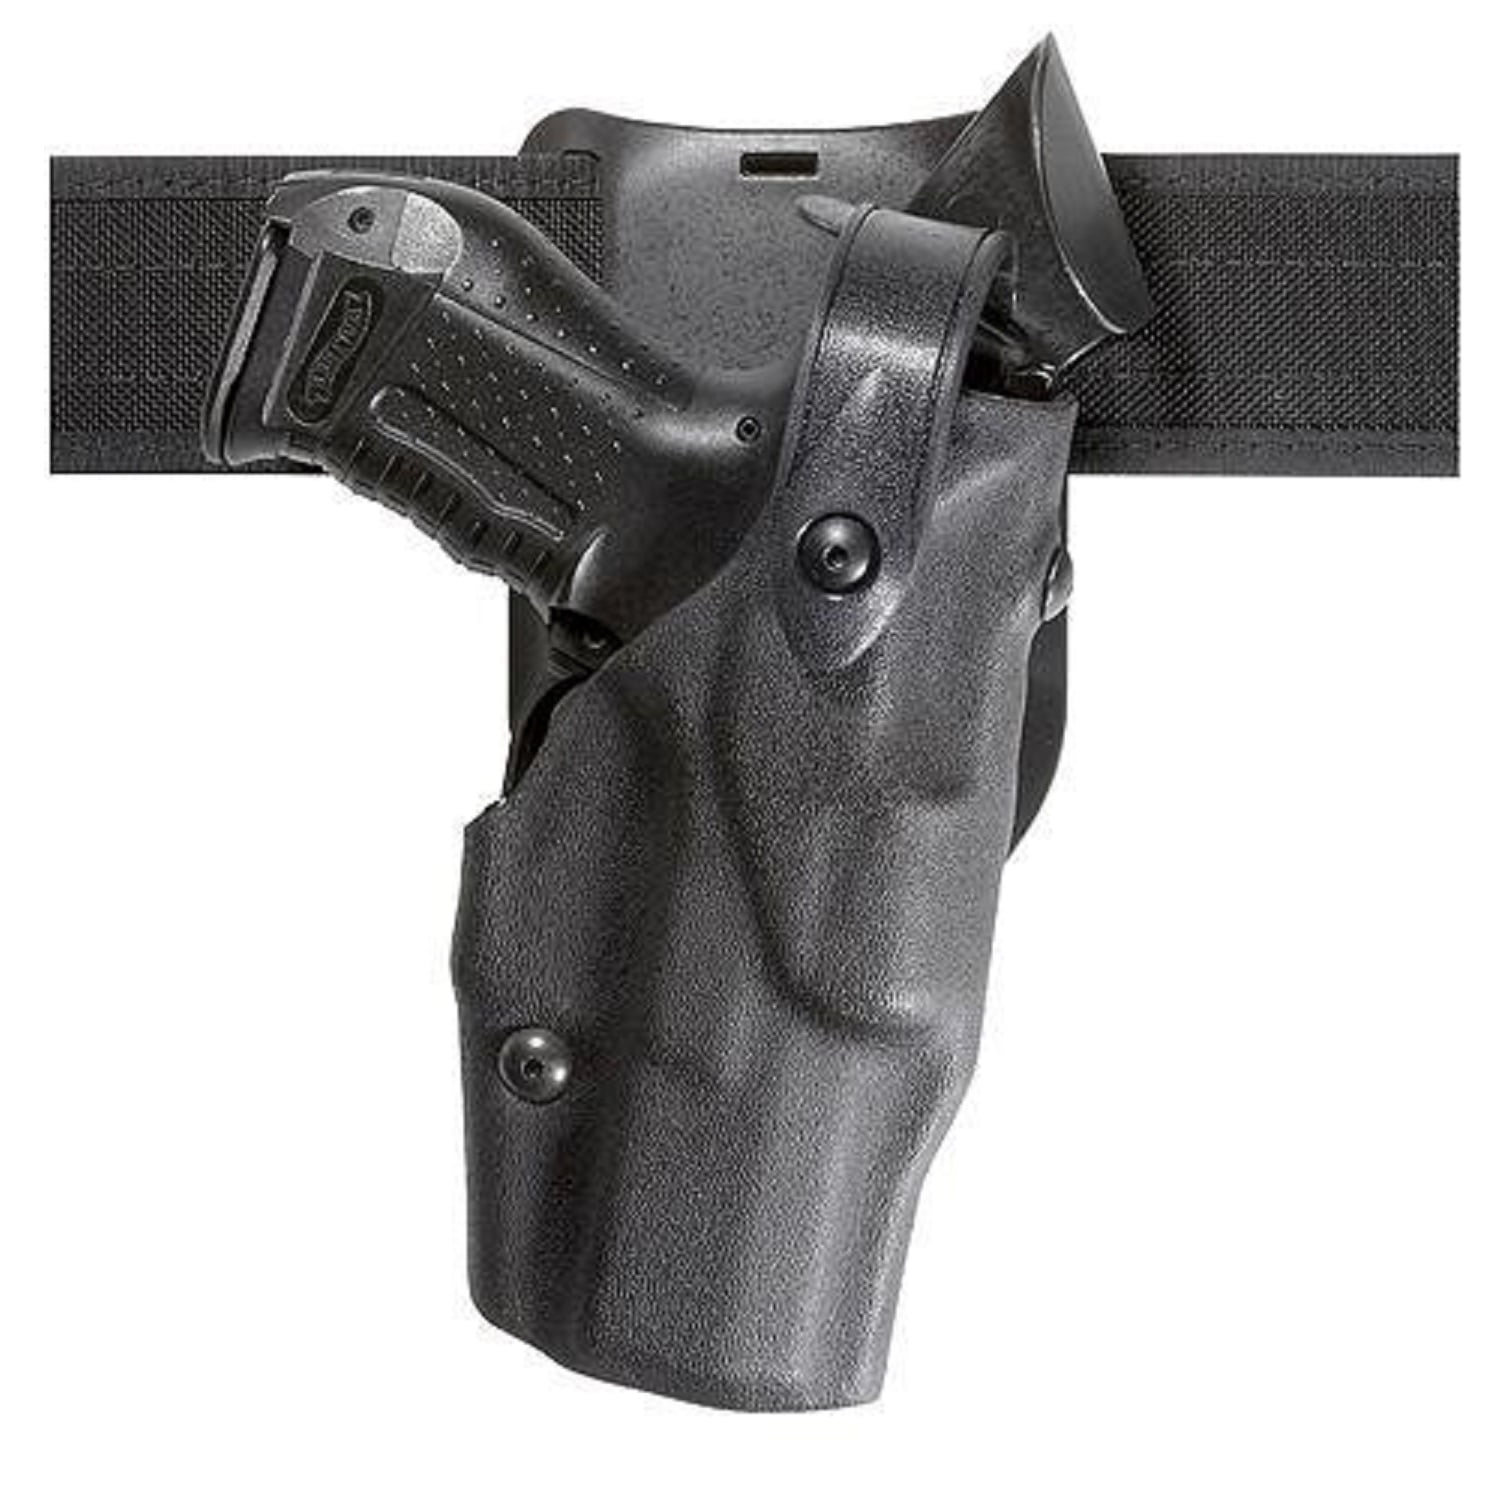 Vehicle Holsters with the Safariland Quick Locking System